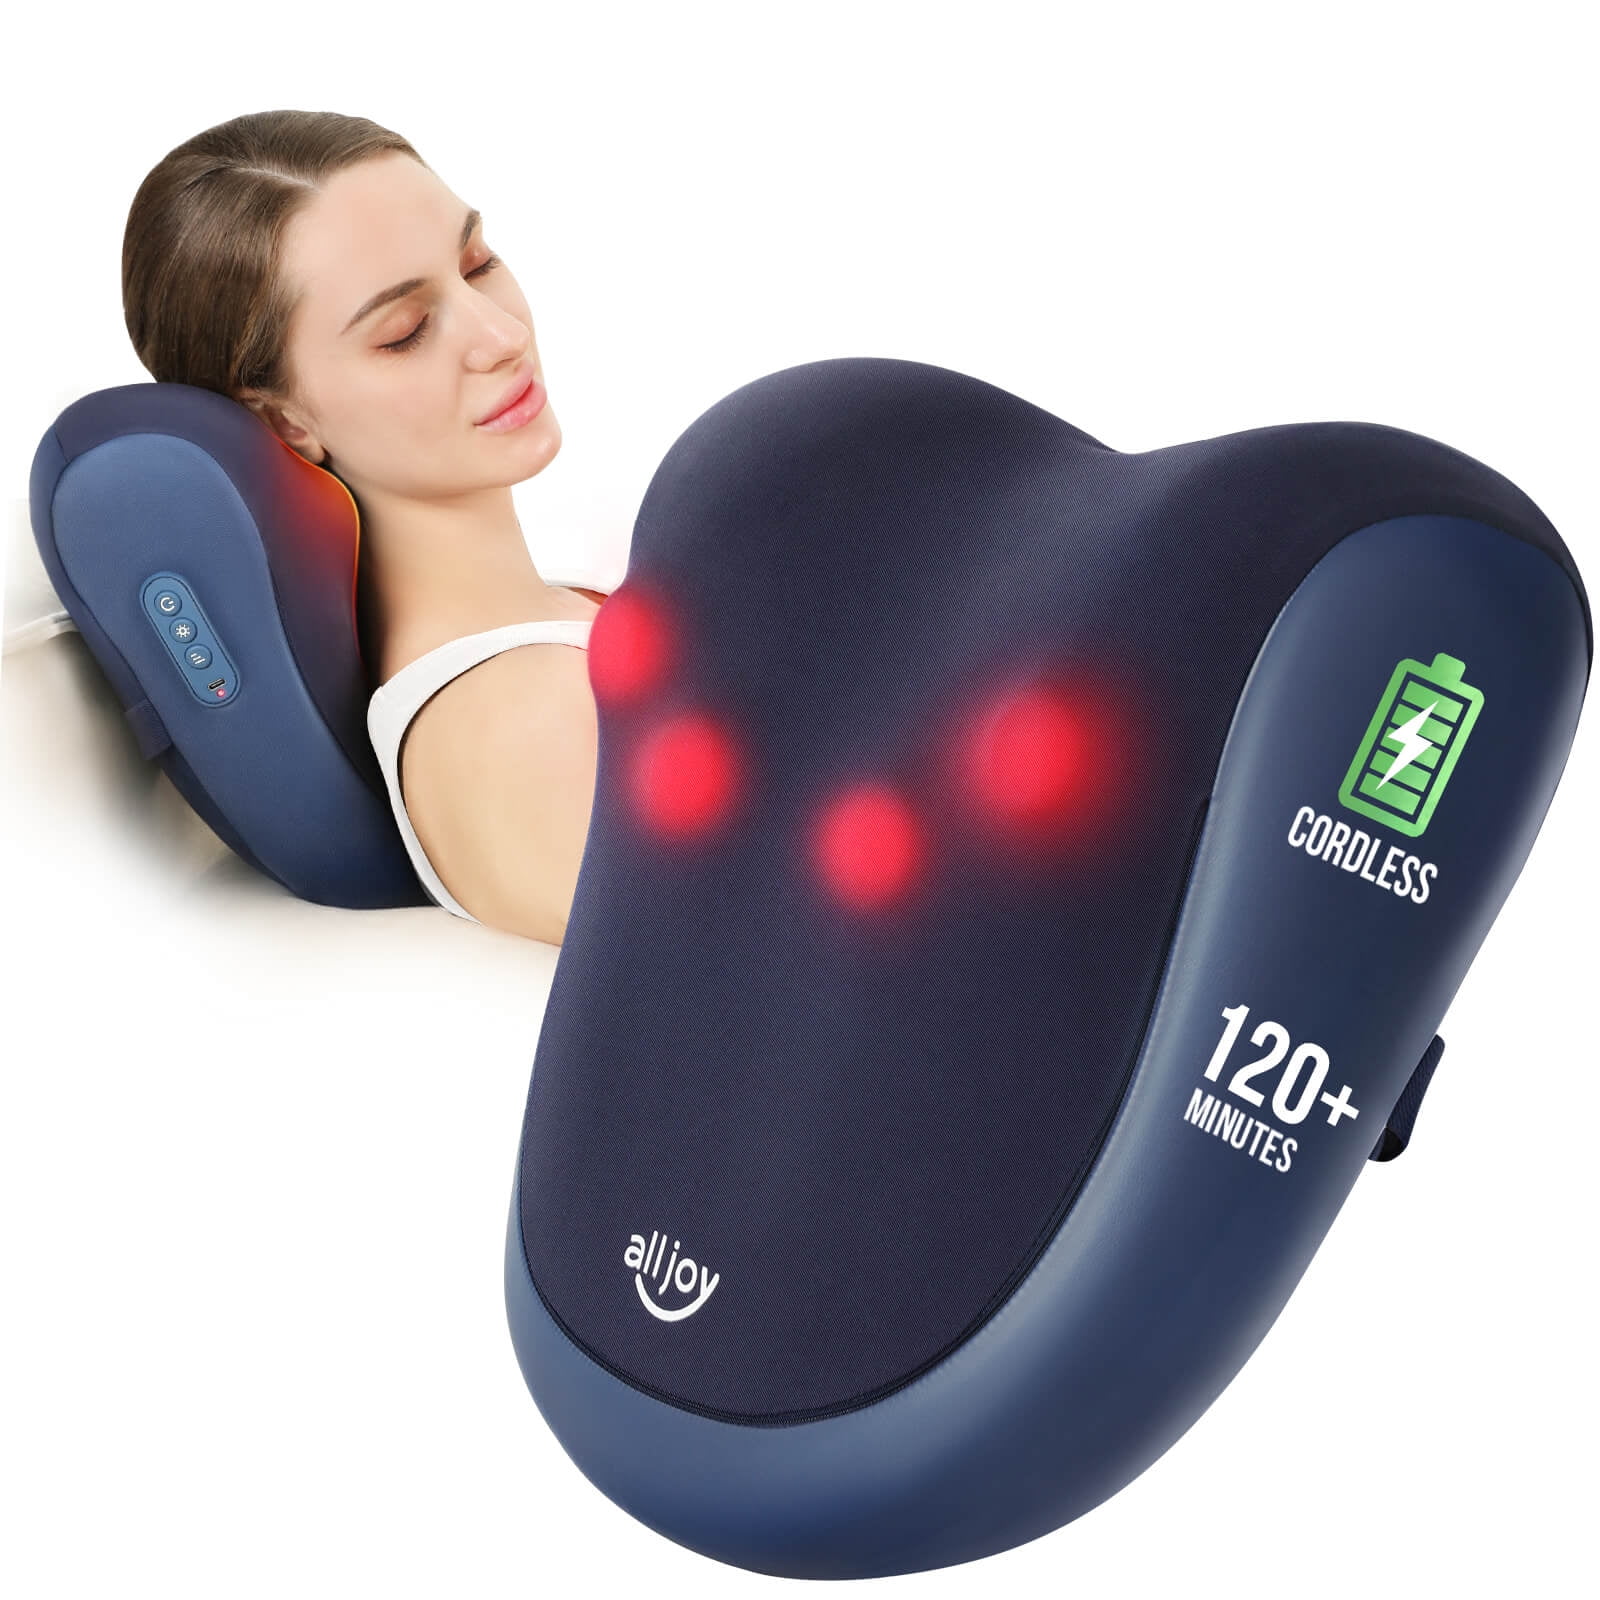  ALLJOY Shiatsu Back and Neck Massager Pillow with